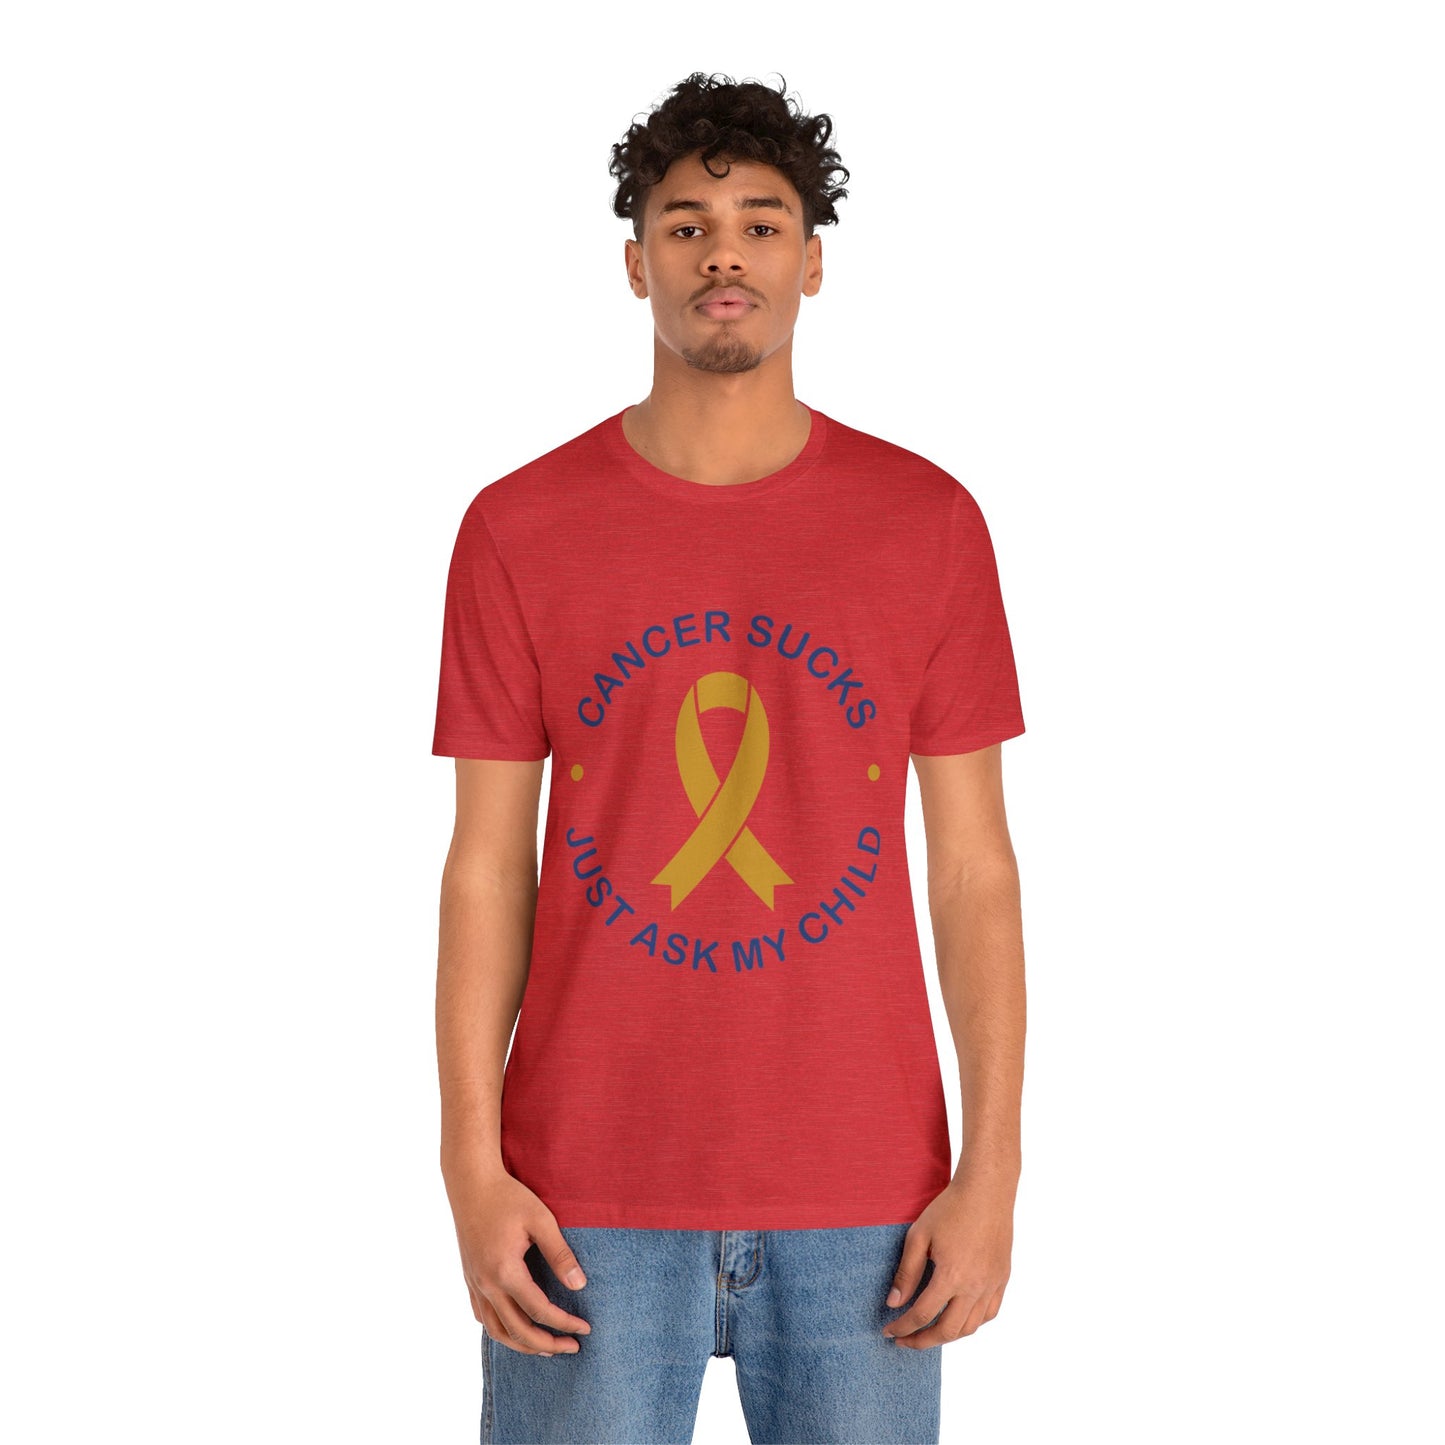 The 3 Fs for Fighting Cancer Tshirt